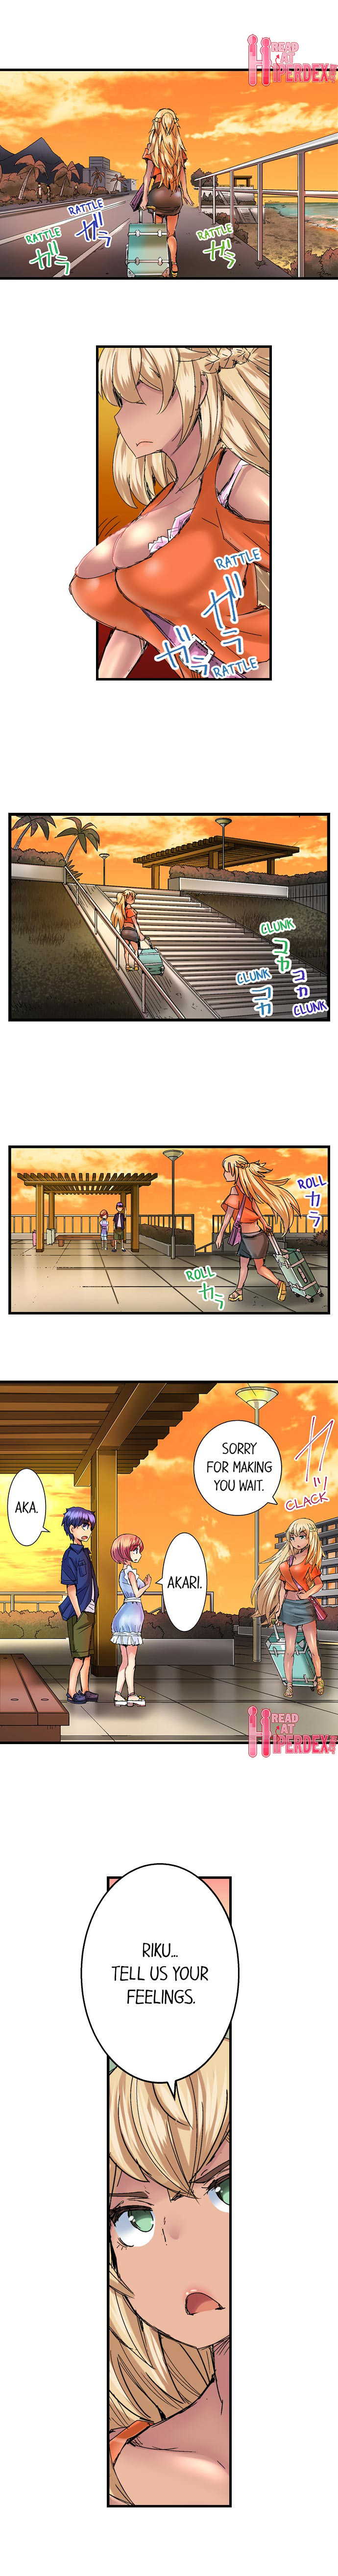 Taking a Hot Tanned Chick’s Virginity - Chapter 39 Page 2